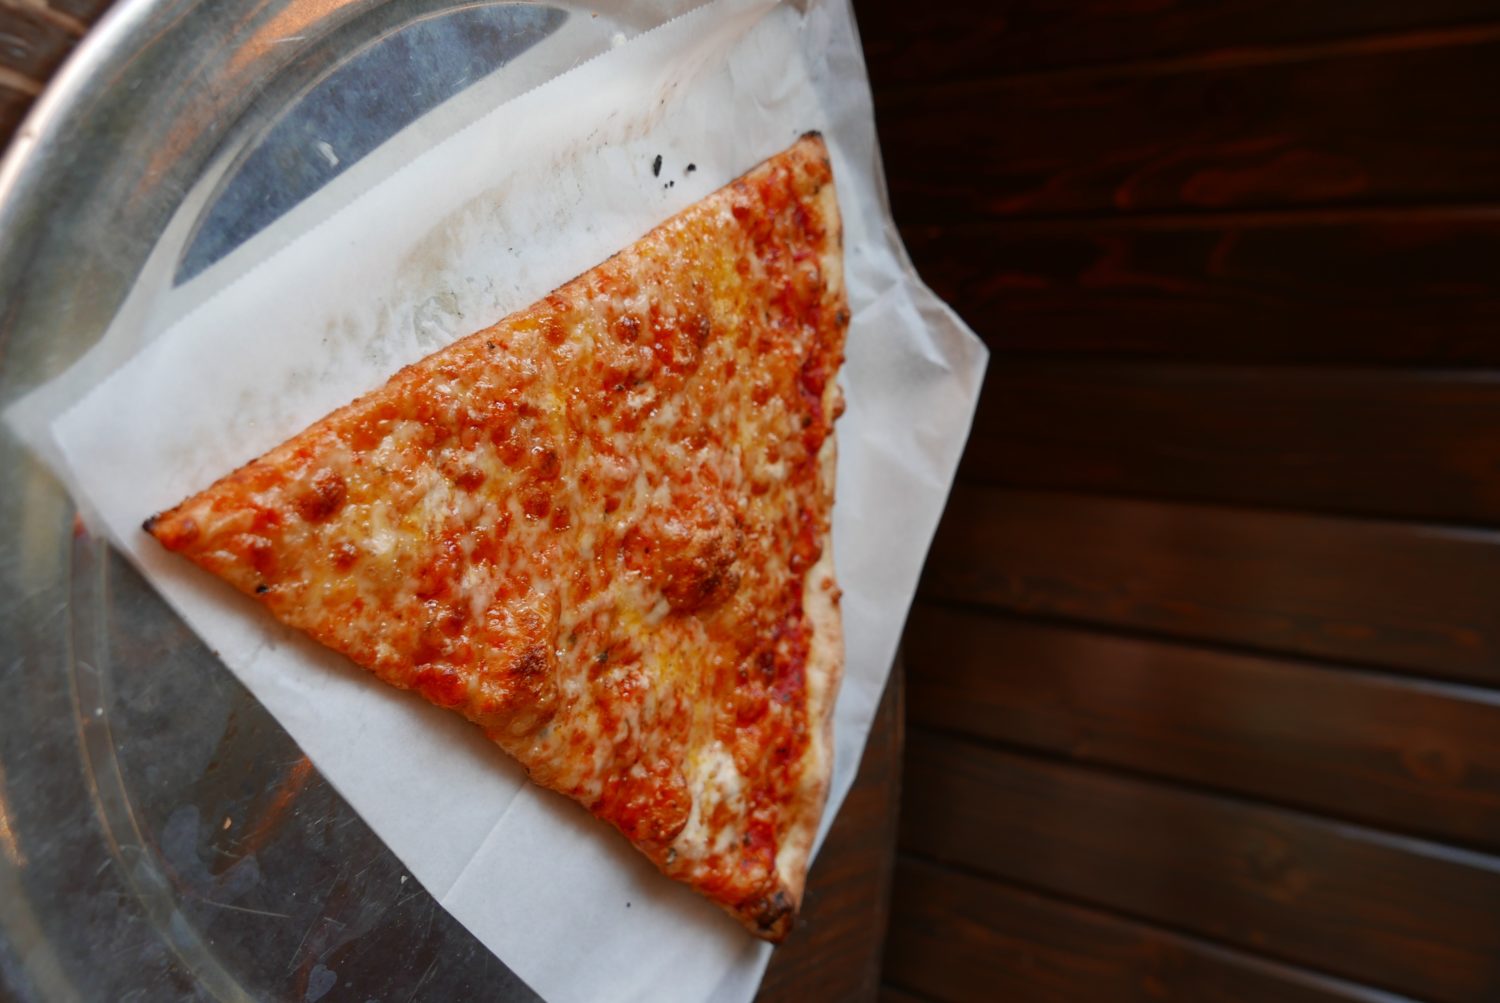 A Pizzanista slice of pizza on a tray.